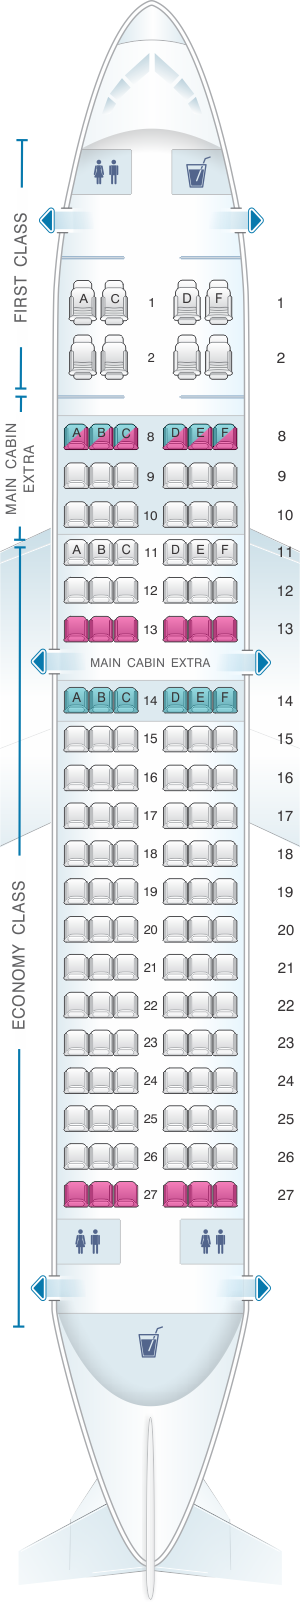 About 9 inches of space between my knees and the seats in front. Plenty of  space. I'm 5-10. Especially nice is the 19-inch seat width compared to  17-inch in regular economy. For